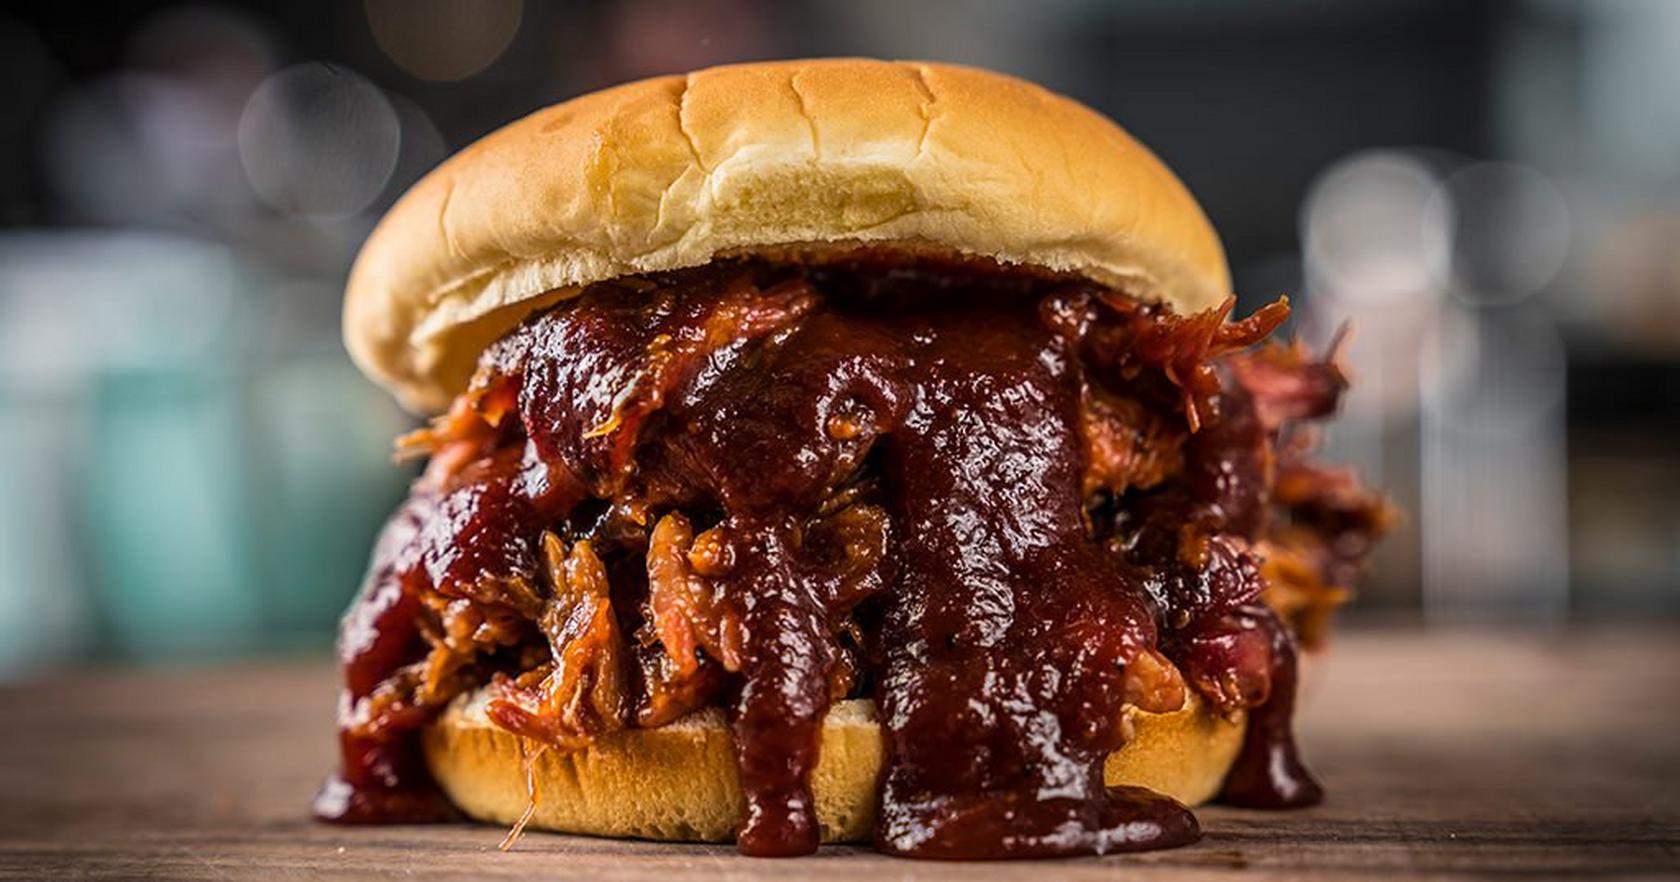 image of Traeger Pulled Pork Sandwiches